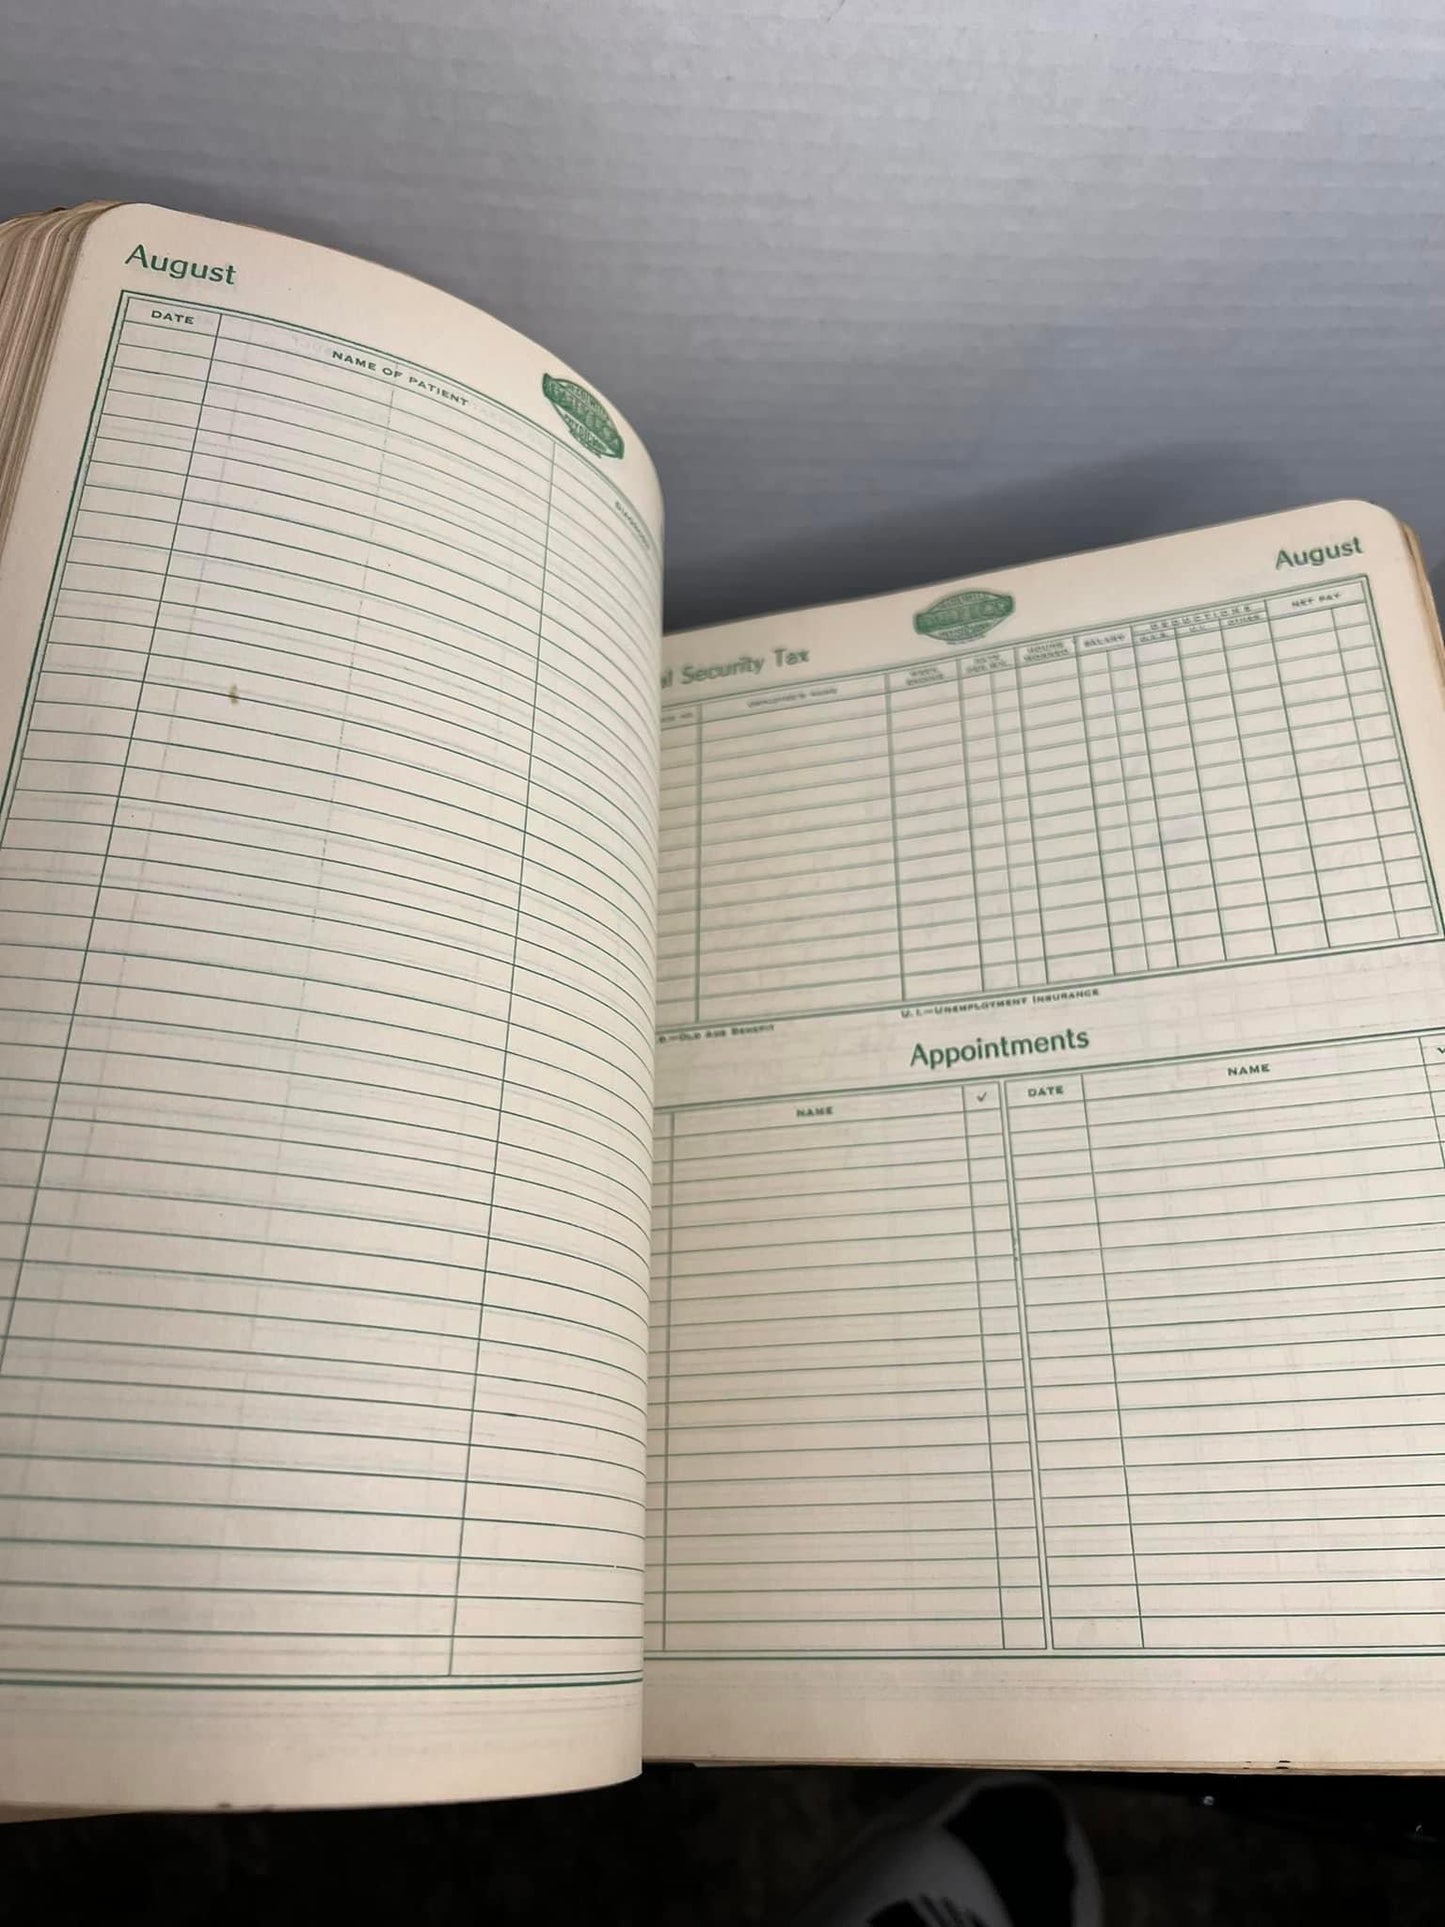 Vintage mid century handwritten 1944 - doctor ledger

Dr. Colewell daily log for physicians